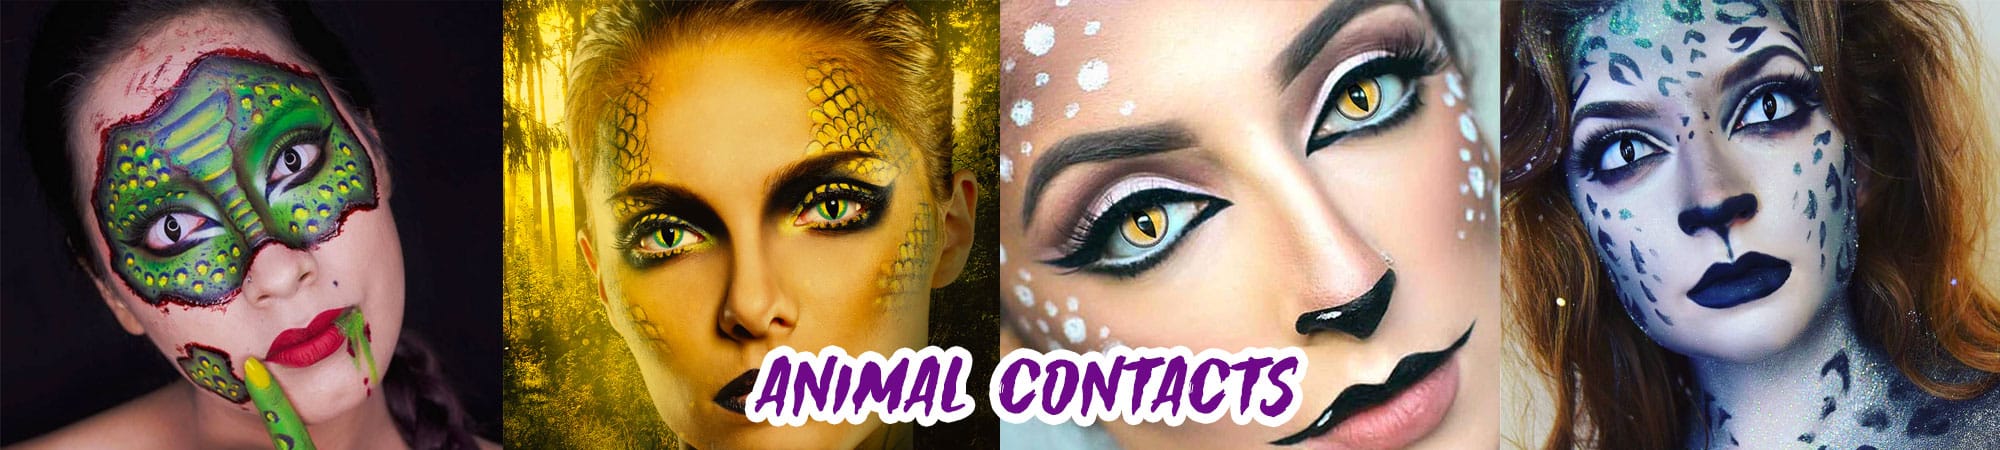 Animal Contacts